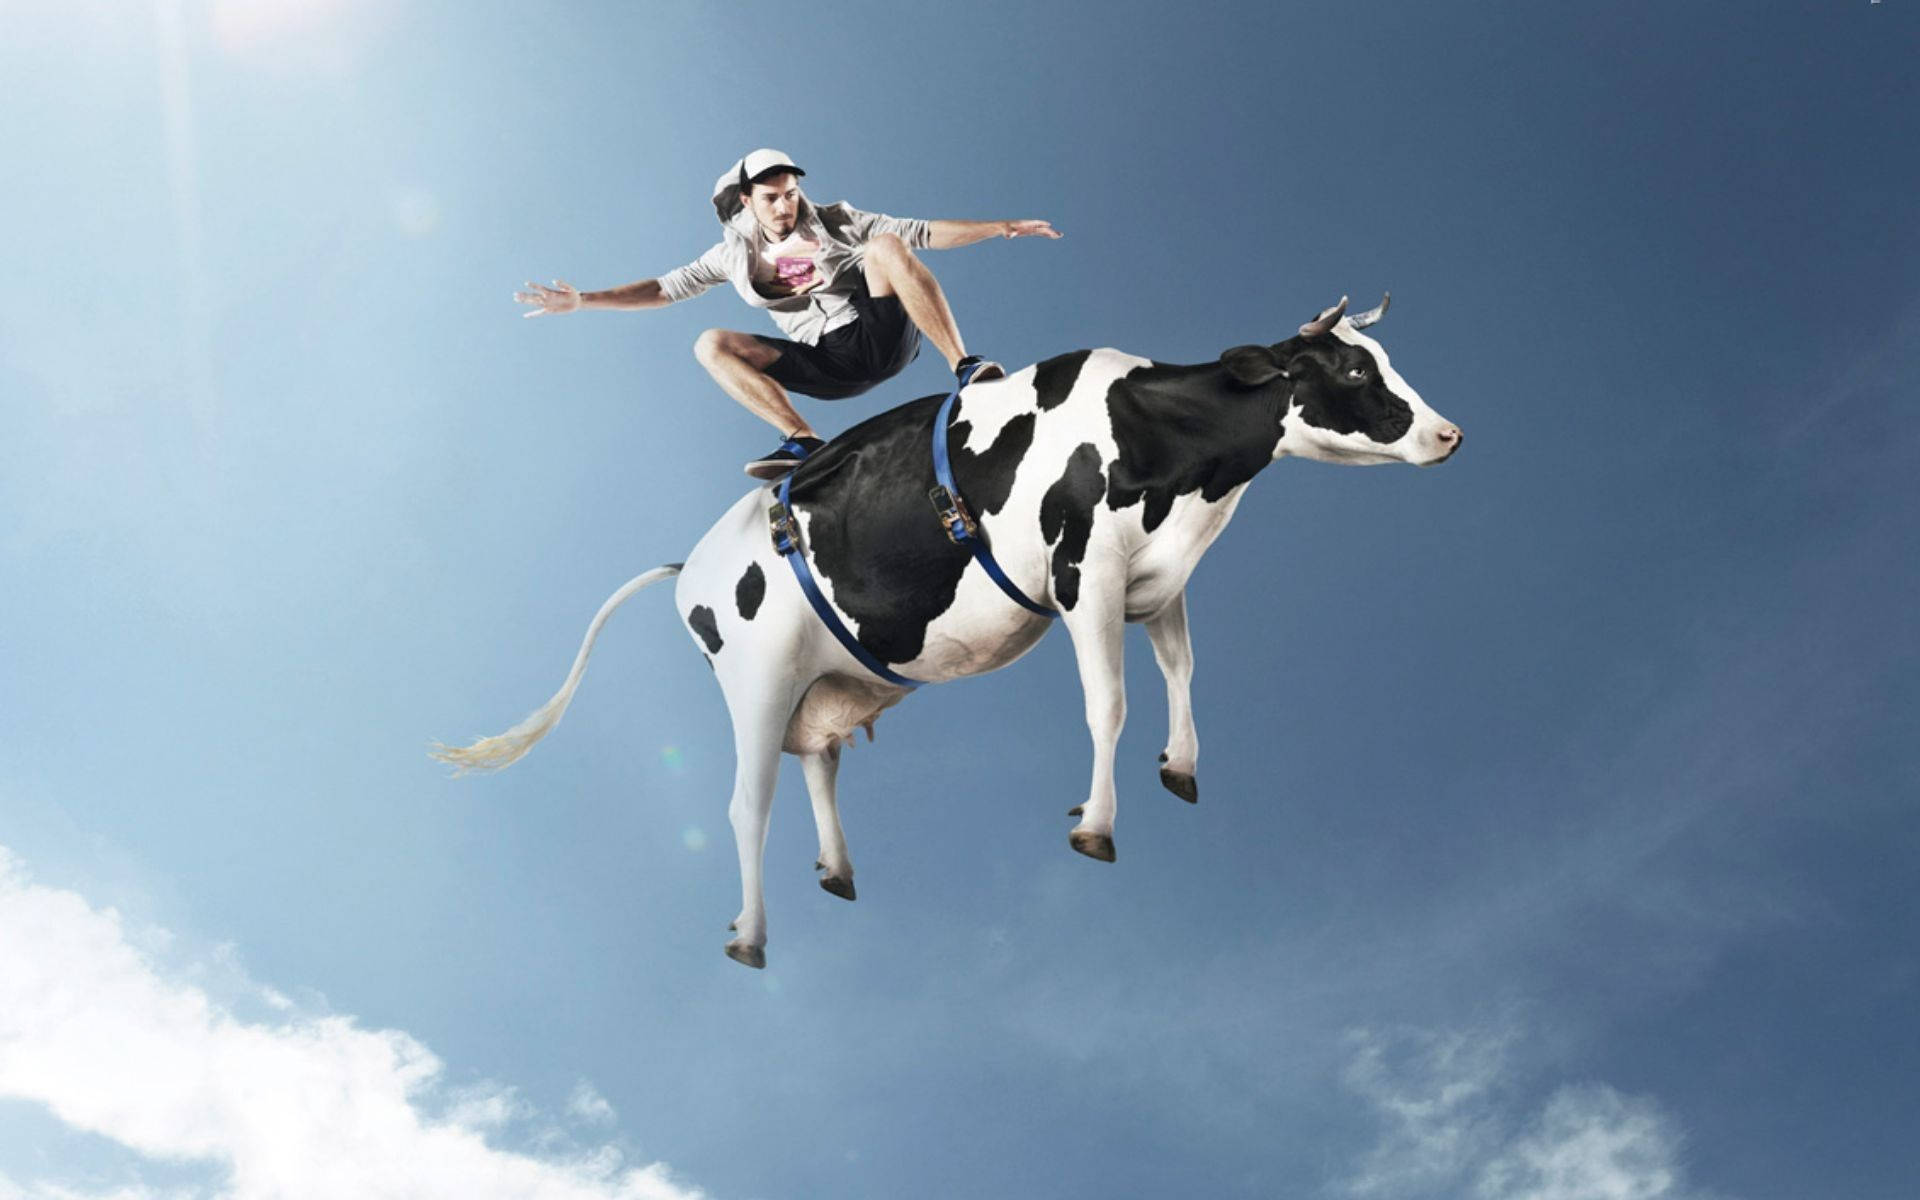 Related Keywords: surfing, cow, wave, ocean, sea, adventure, surfing cow, brave man, man on wave. Wallpaper